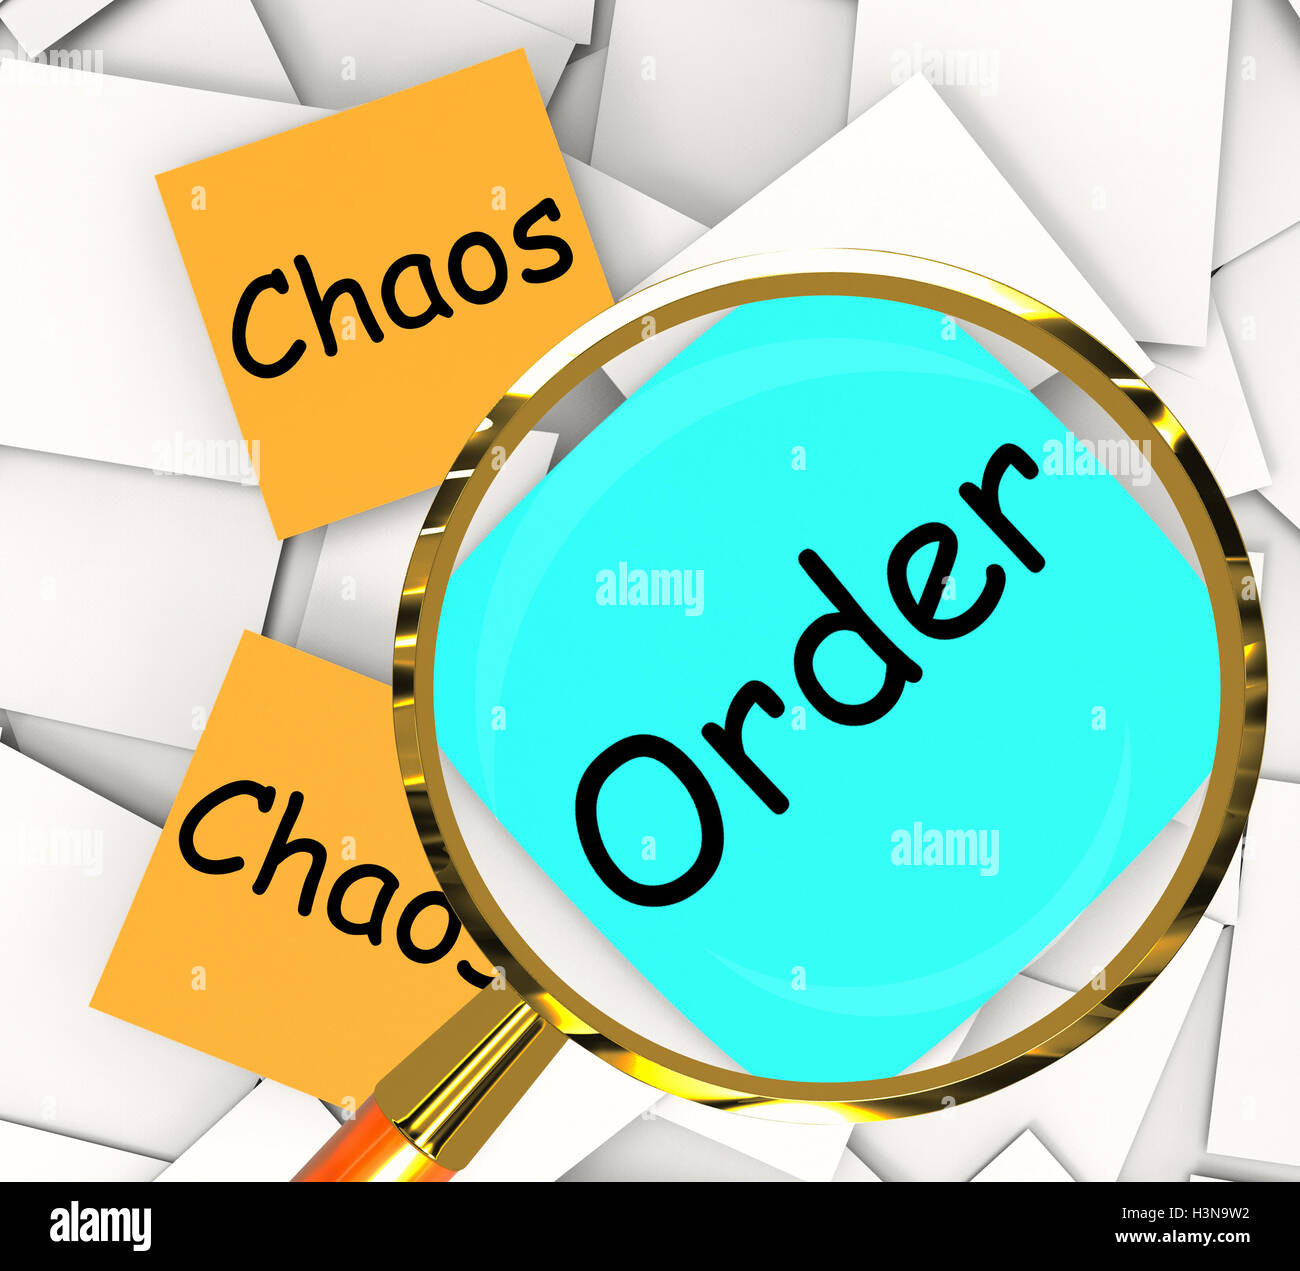 Chaos Order Post-It Papers Show Disorganized Or Ordered Stock Photo